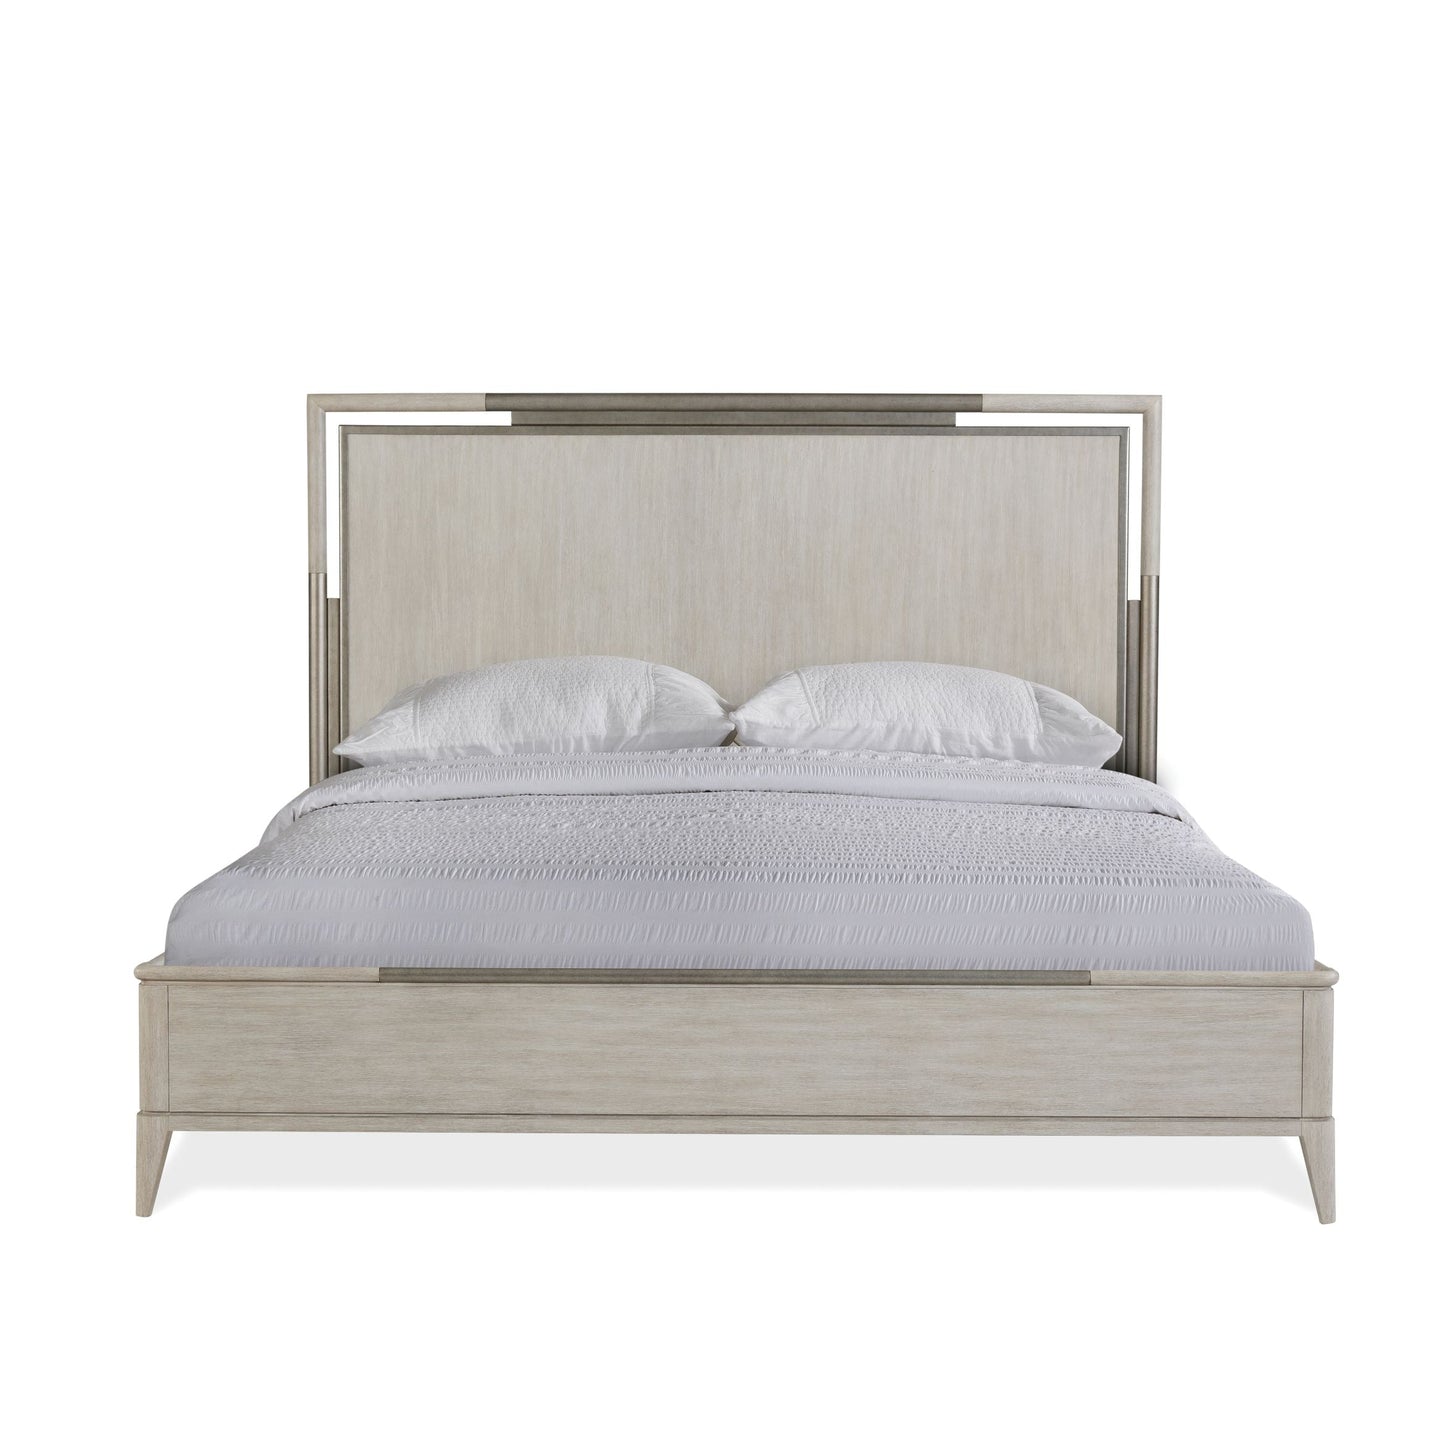 Mantalia Solid Wood Bedroom Collection, Champagne